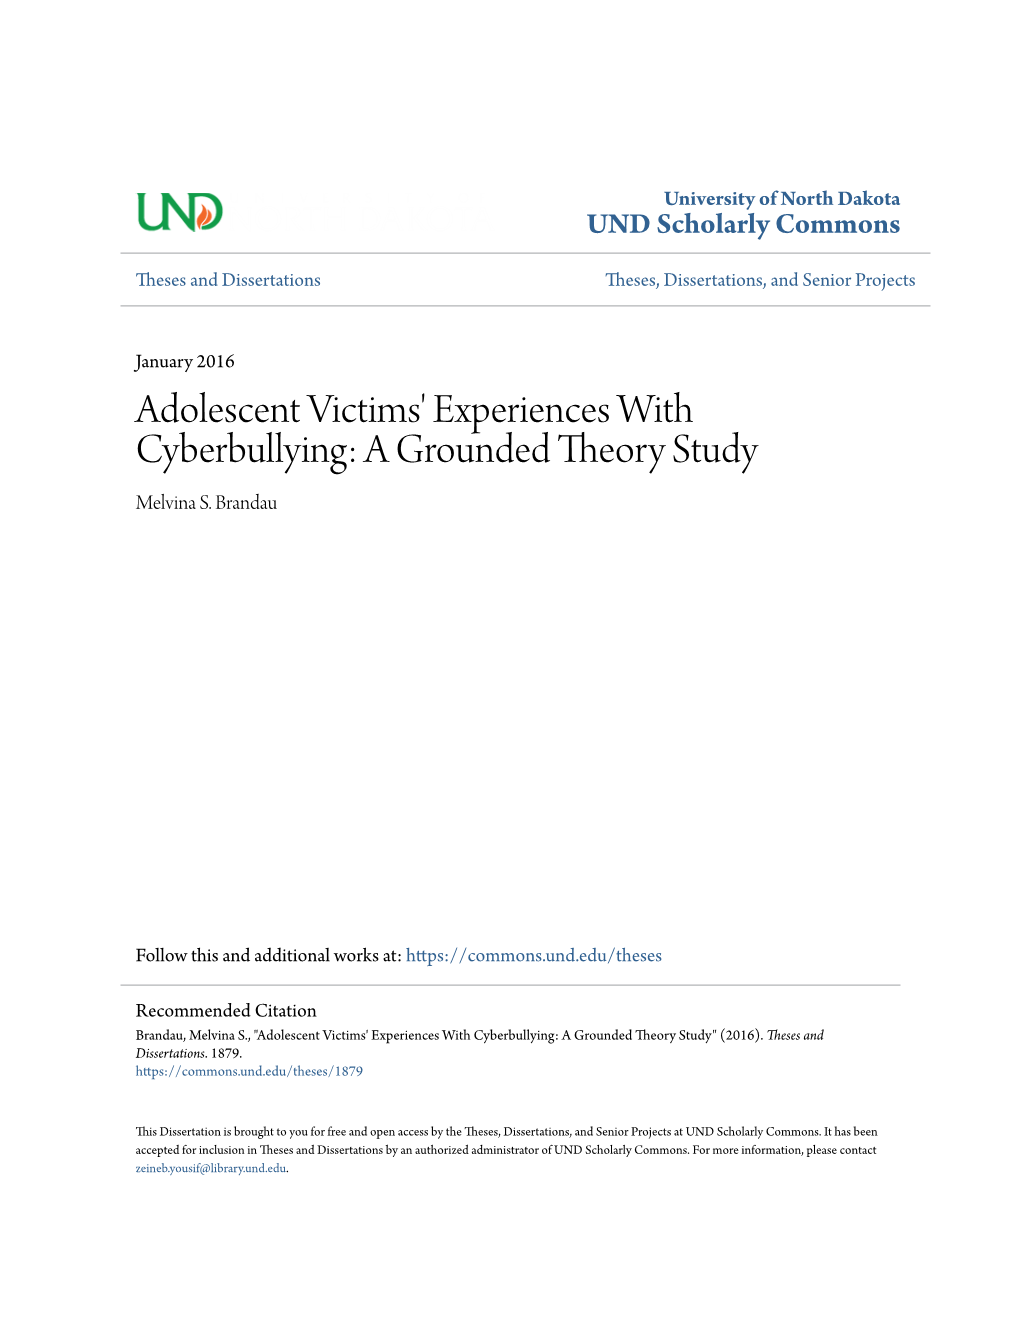 Adolescent Victims' Experiences with Cyberbullying: a Grounded Theory Study Melvina S